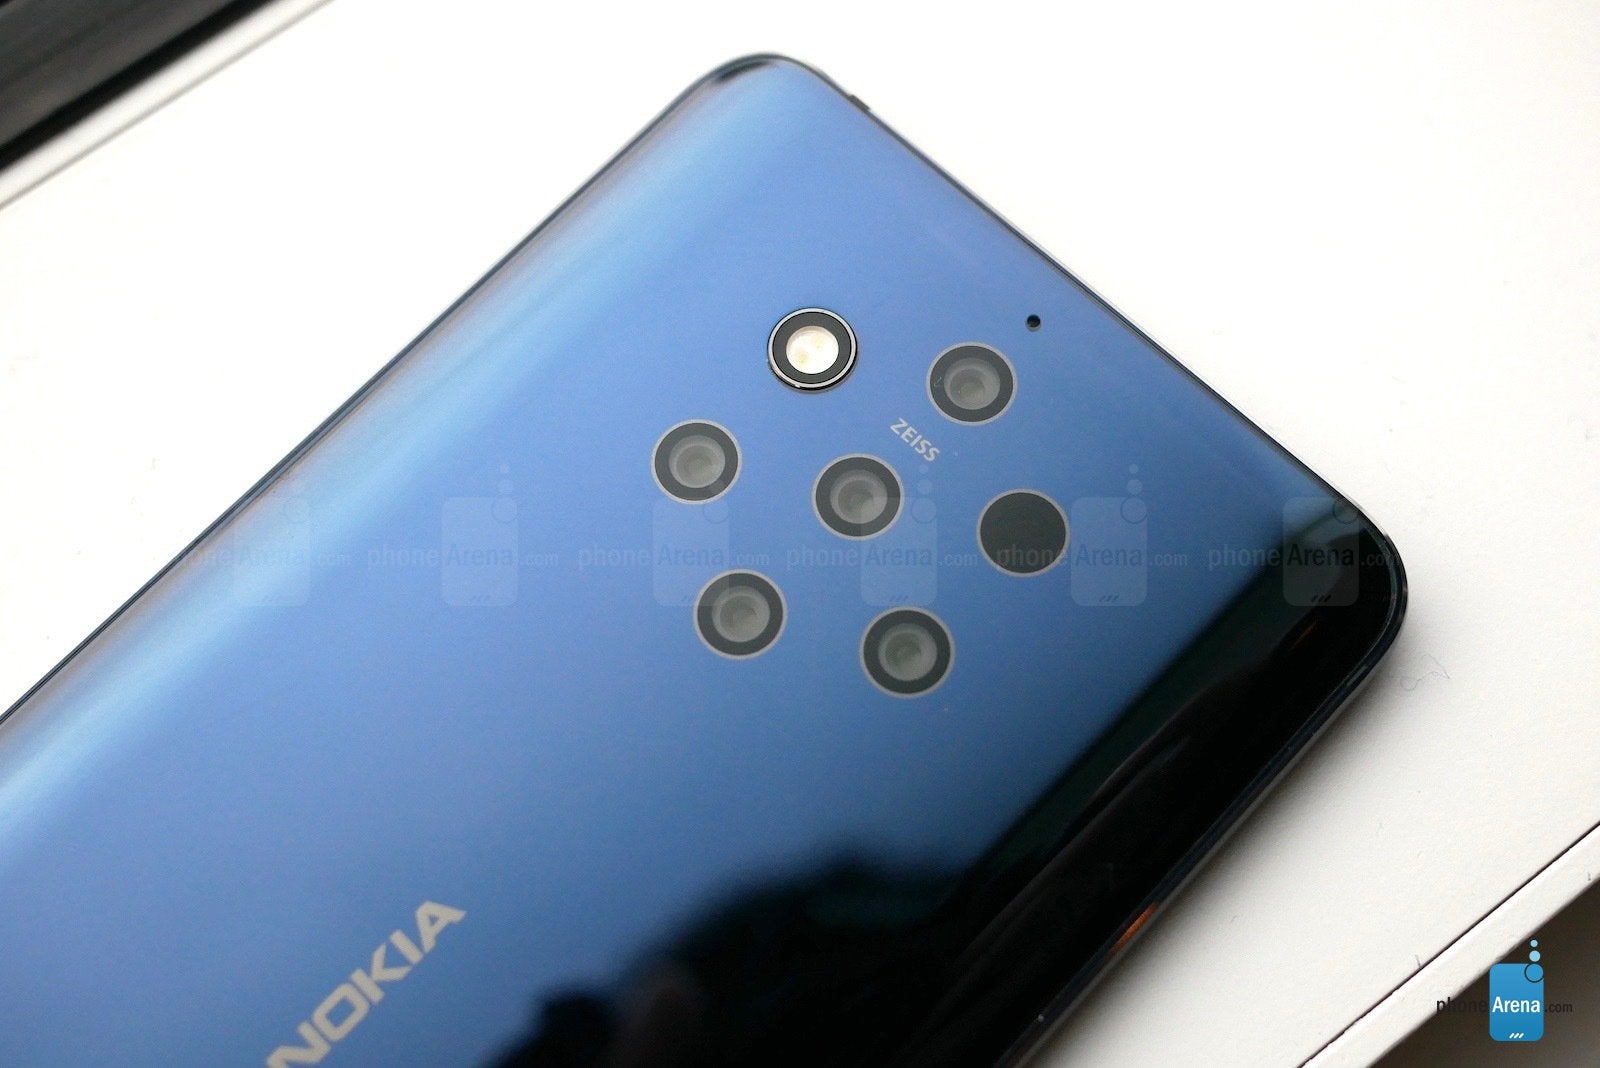 Nokia 9 PureView Hands-On: A cutting-edge flagship headed The States! - PhoneArena